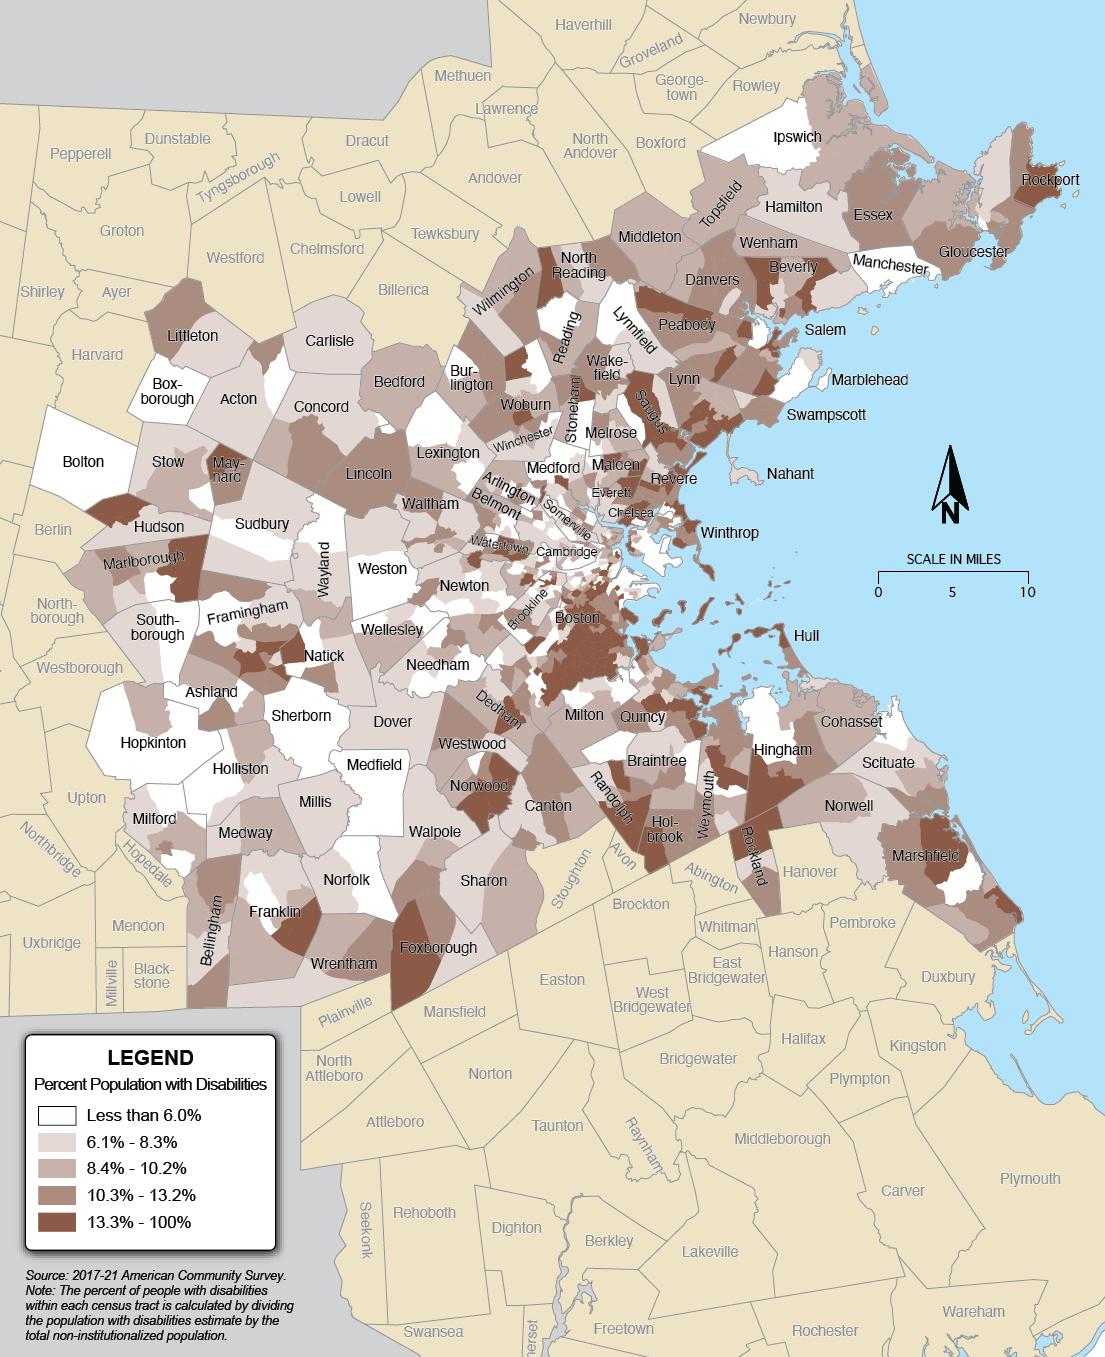 A map showing the percentage of people with disabilities in the Boston Region.